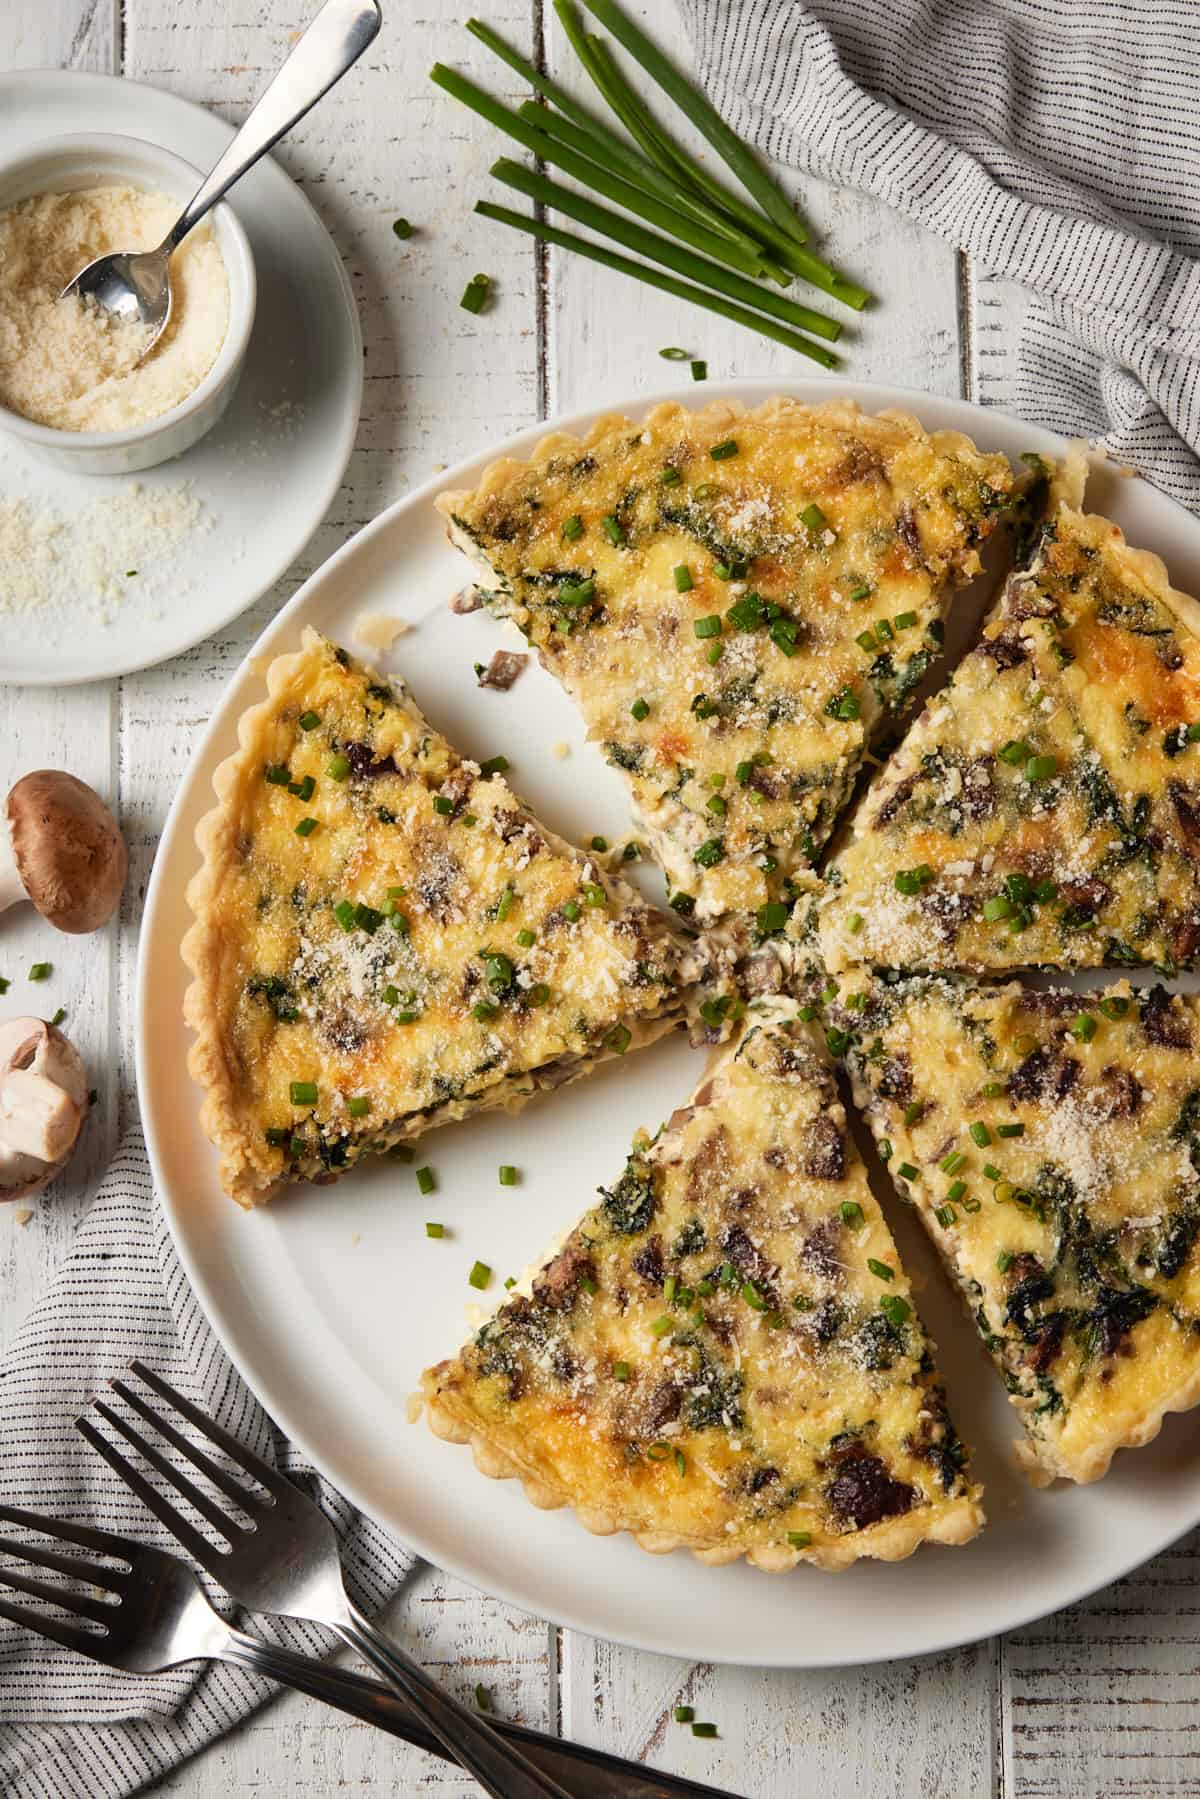 Sliced quiche on plate with parmesan cheese sprinkled on top.